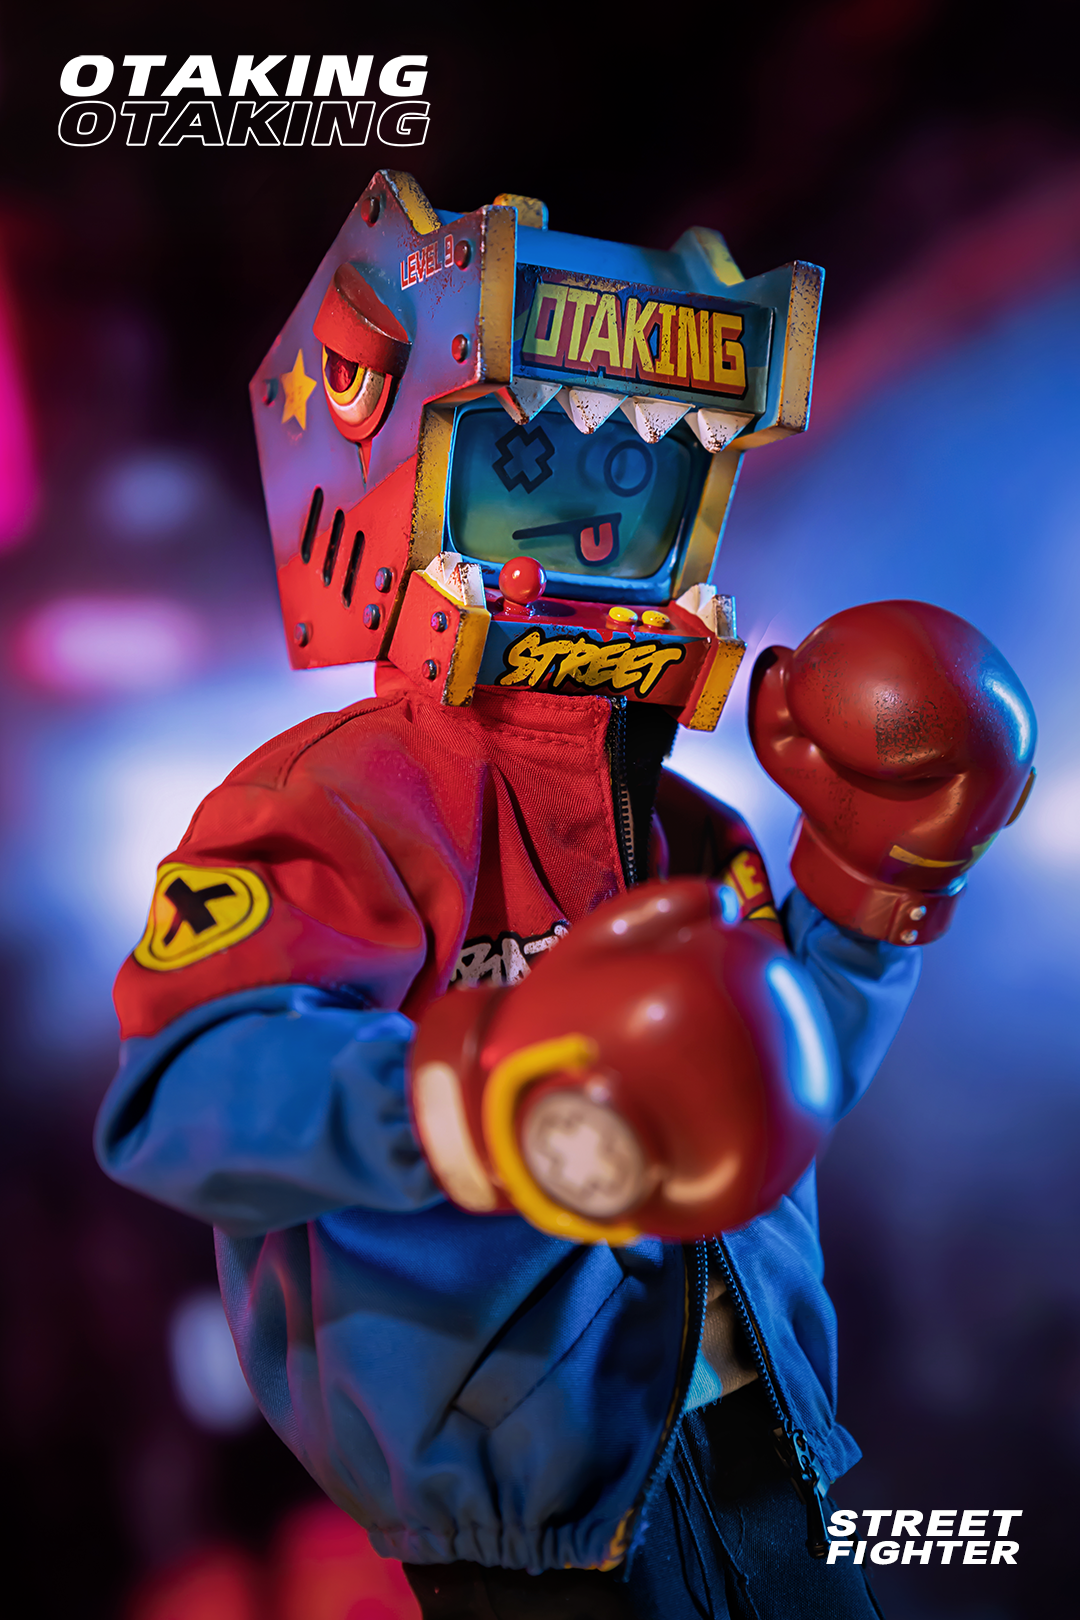 OTAKING - Street fighter toy robot action figure with hero cartoon character and person wearing robot garment.